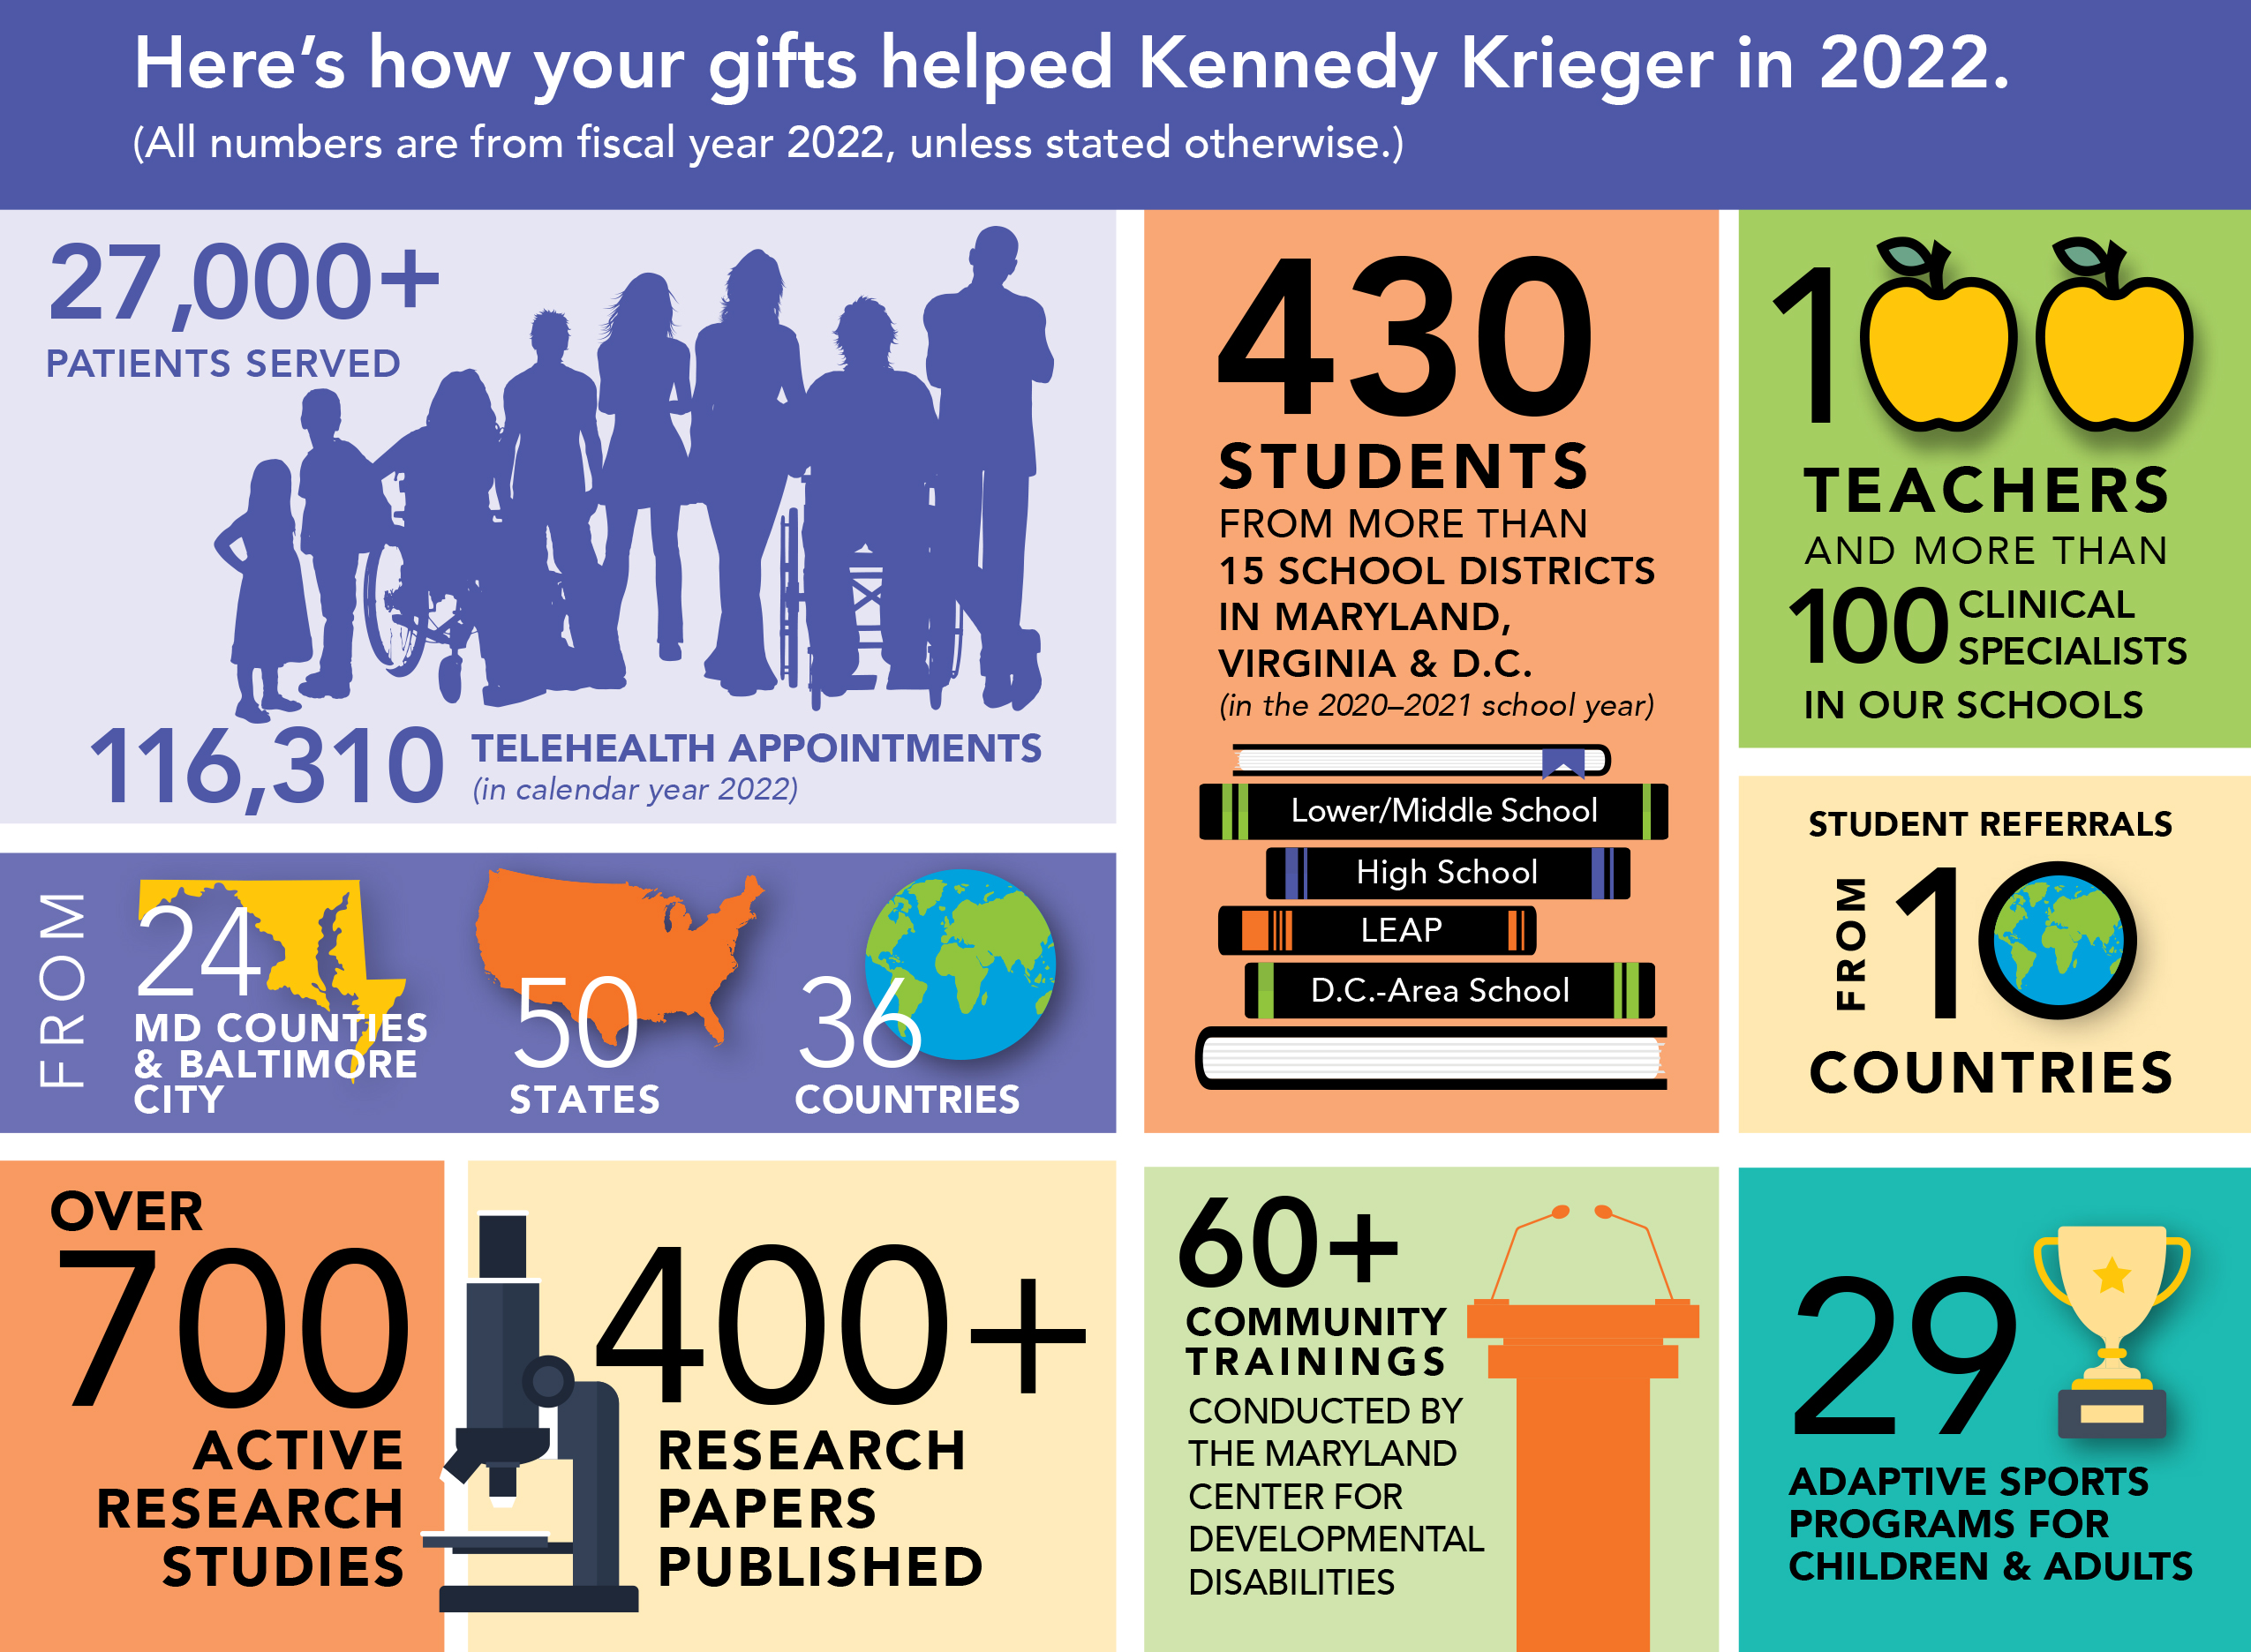 Infographic showing how supporters’ gifts helped Kennedy Krieger in 2022: In fiscal year 2022, Kennedy Krieger served 27,000-plus patients, from 24 Maryland counties and Baltimore City, 50 states and 36 countries. In calendar year 2022, the Institute offered 116,310 telehealth appointments. In the 2020–2021 school year, the Institute served 430 students—from more than 15 school districts in Maryland, Virginia and D.C.—in its four schools: a lower/middle school, a high school, a D.C.-area school and LEAP. Staffing the schools that year were 100 teachers and more than 100 clinical specialists. Student referrals came from 10 countries that school year. Also in fiscal year 2022, there were over 700 active research studies, 400-plus research papers were published, 60-plus community trainings were conducted by the Maryland Center for Developmental Disabilities, and 29 adaptive sports programs were offered for children and adults.